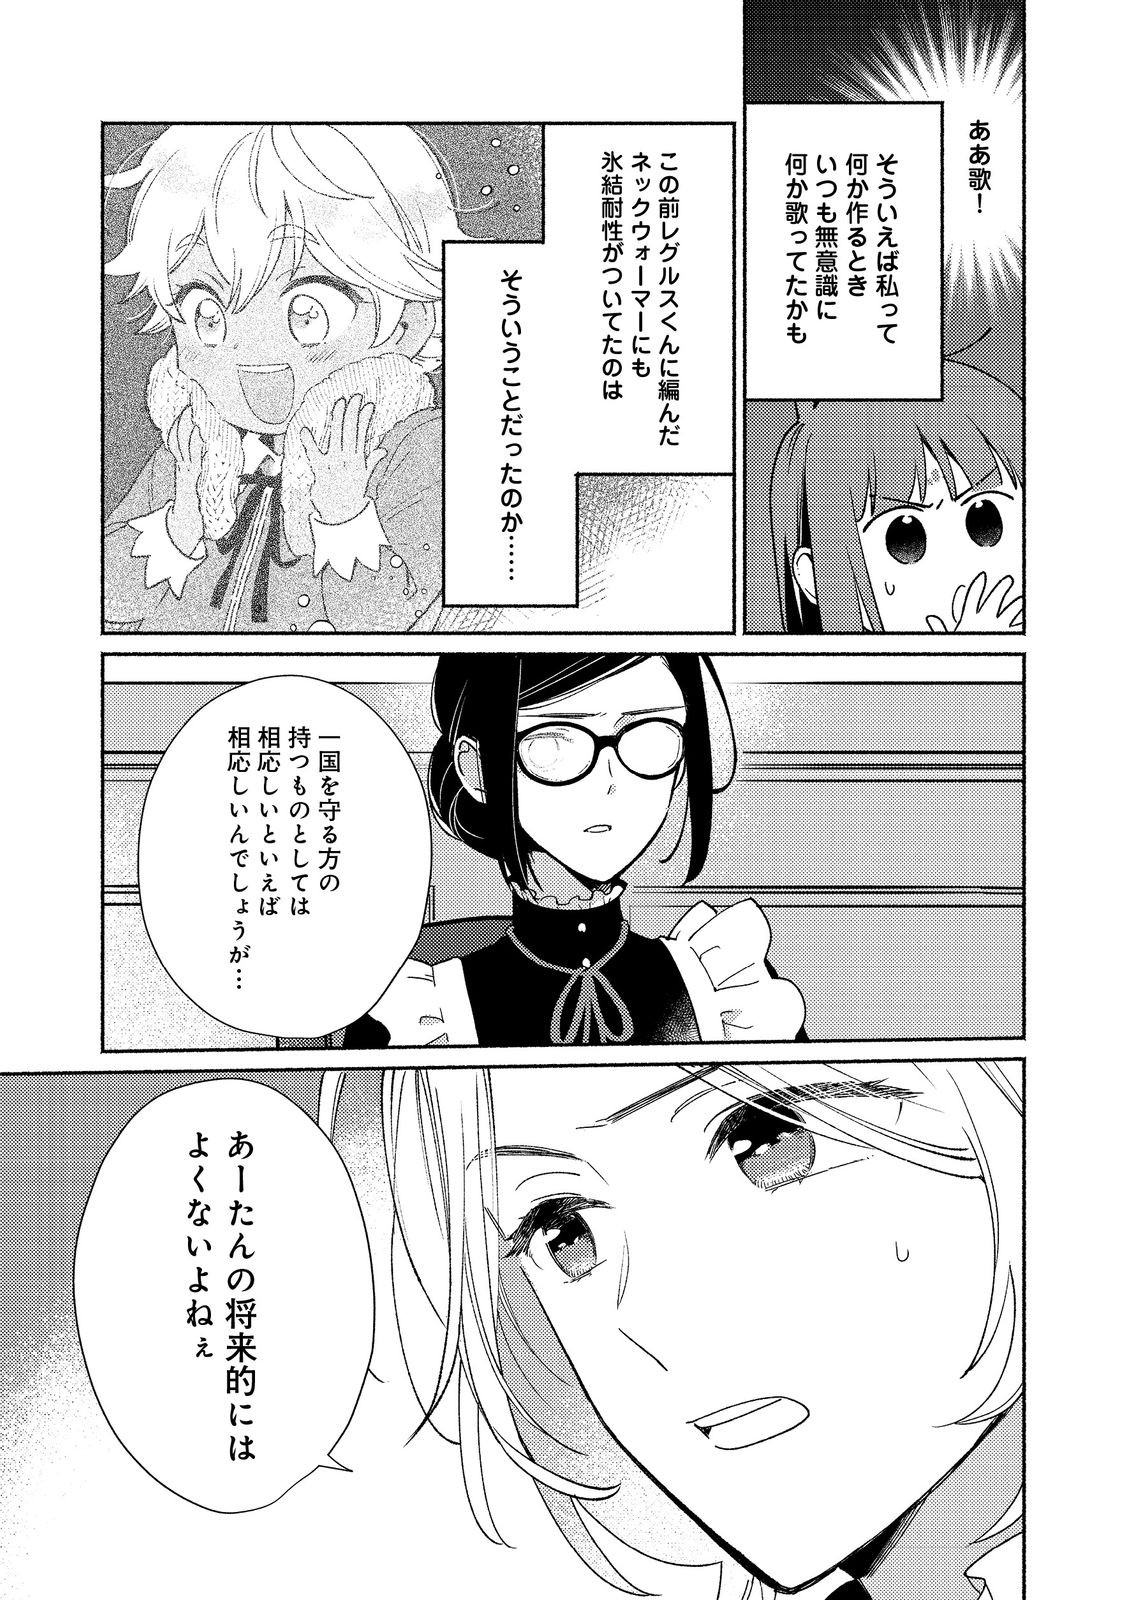 I’m the White Pig Nobleman 第21.2話 - Page 3